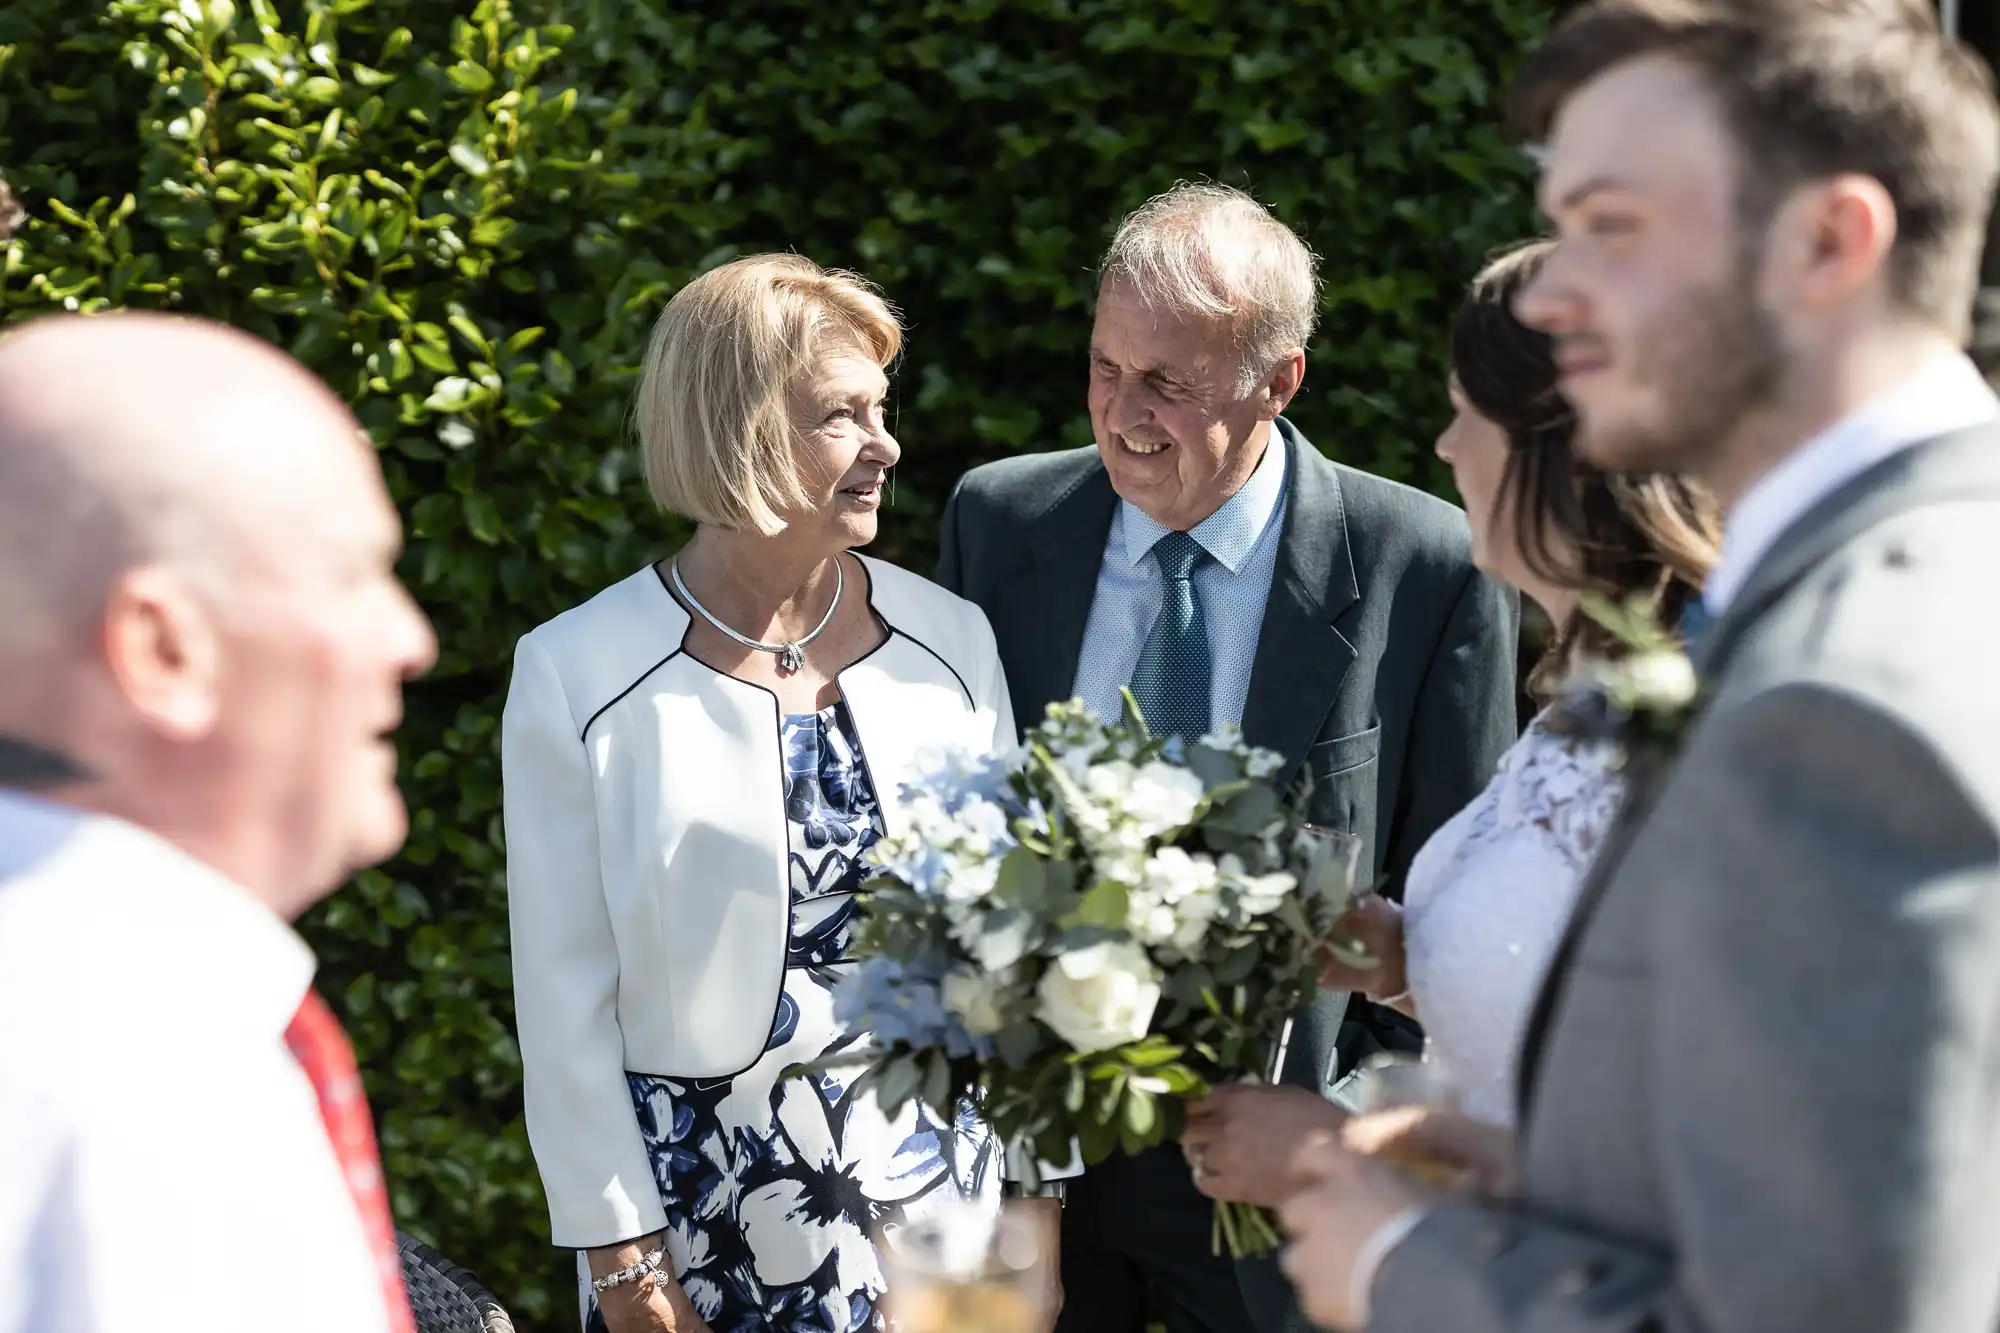 An elderly couple smiling and talking to guests at a wedding, surrounded by people holding flowers in a sunny garden setting.